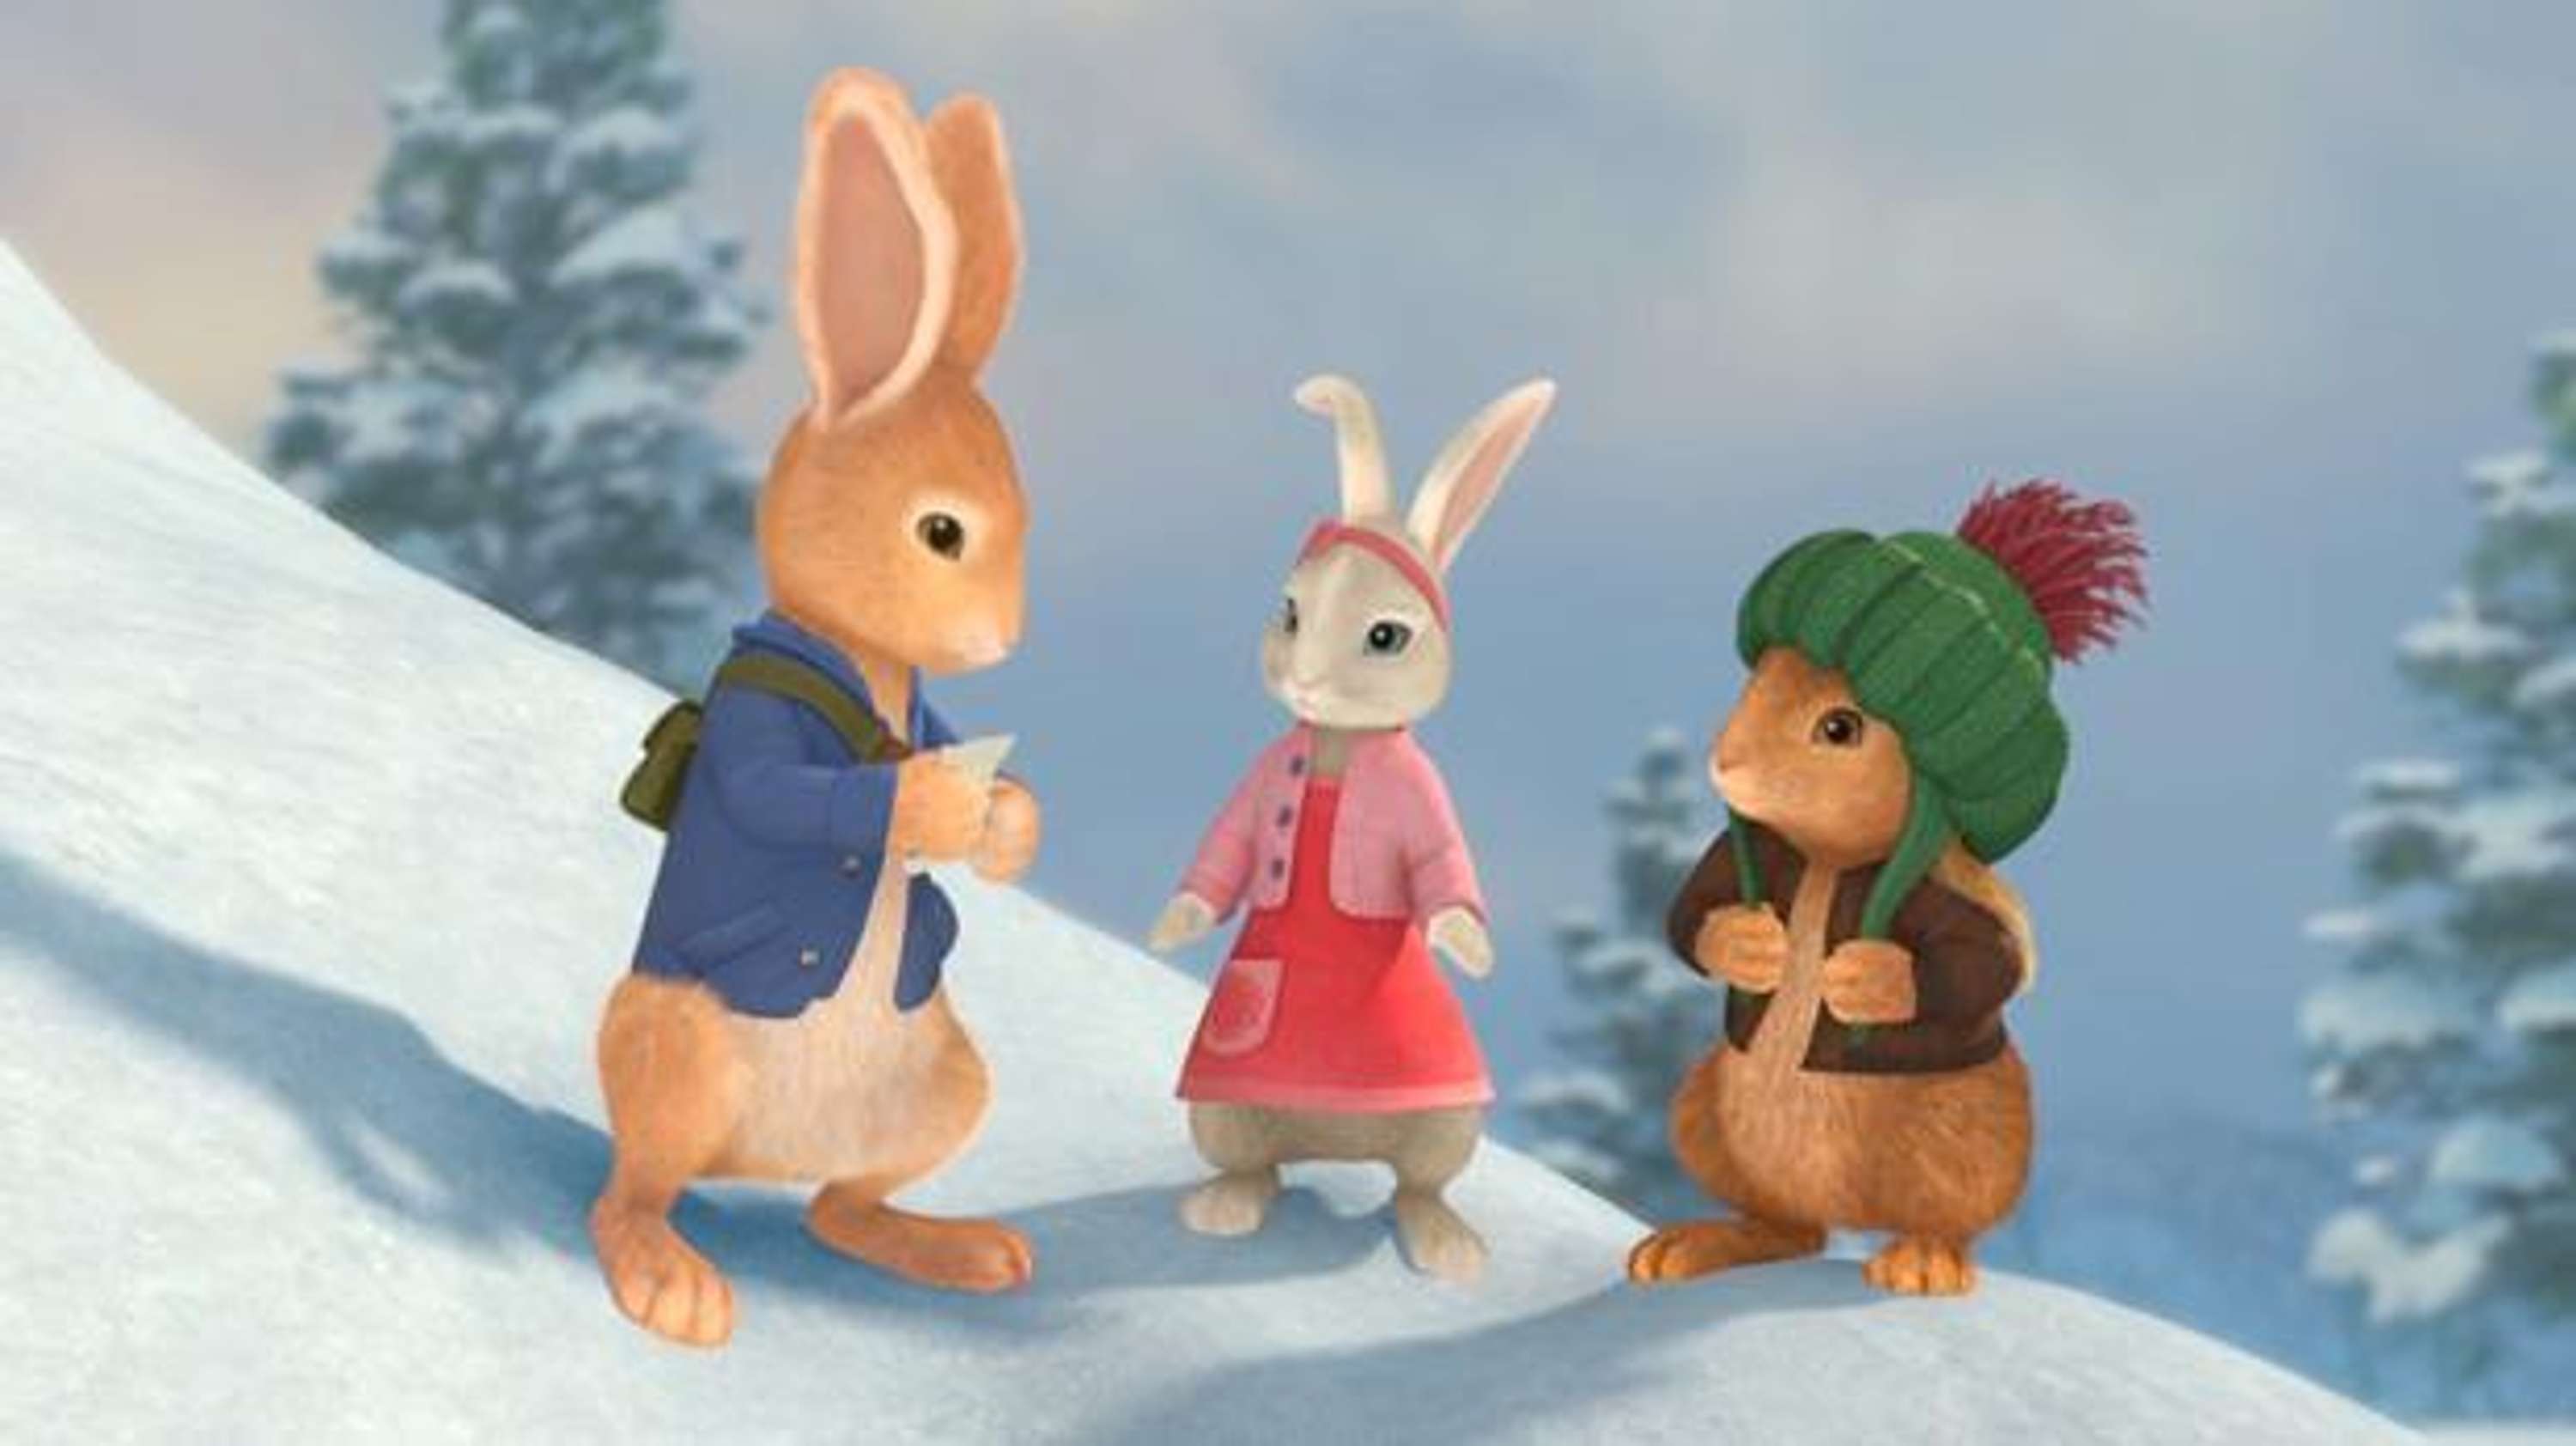 Peter Rabbit on Nickelodeon for Christmas, Then as Series - The New York  Times